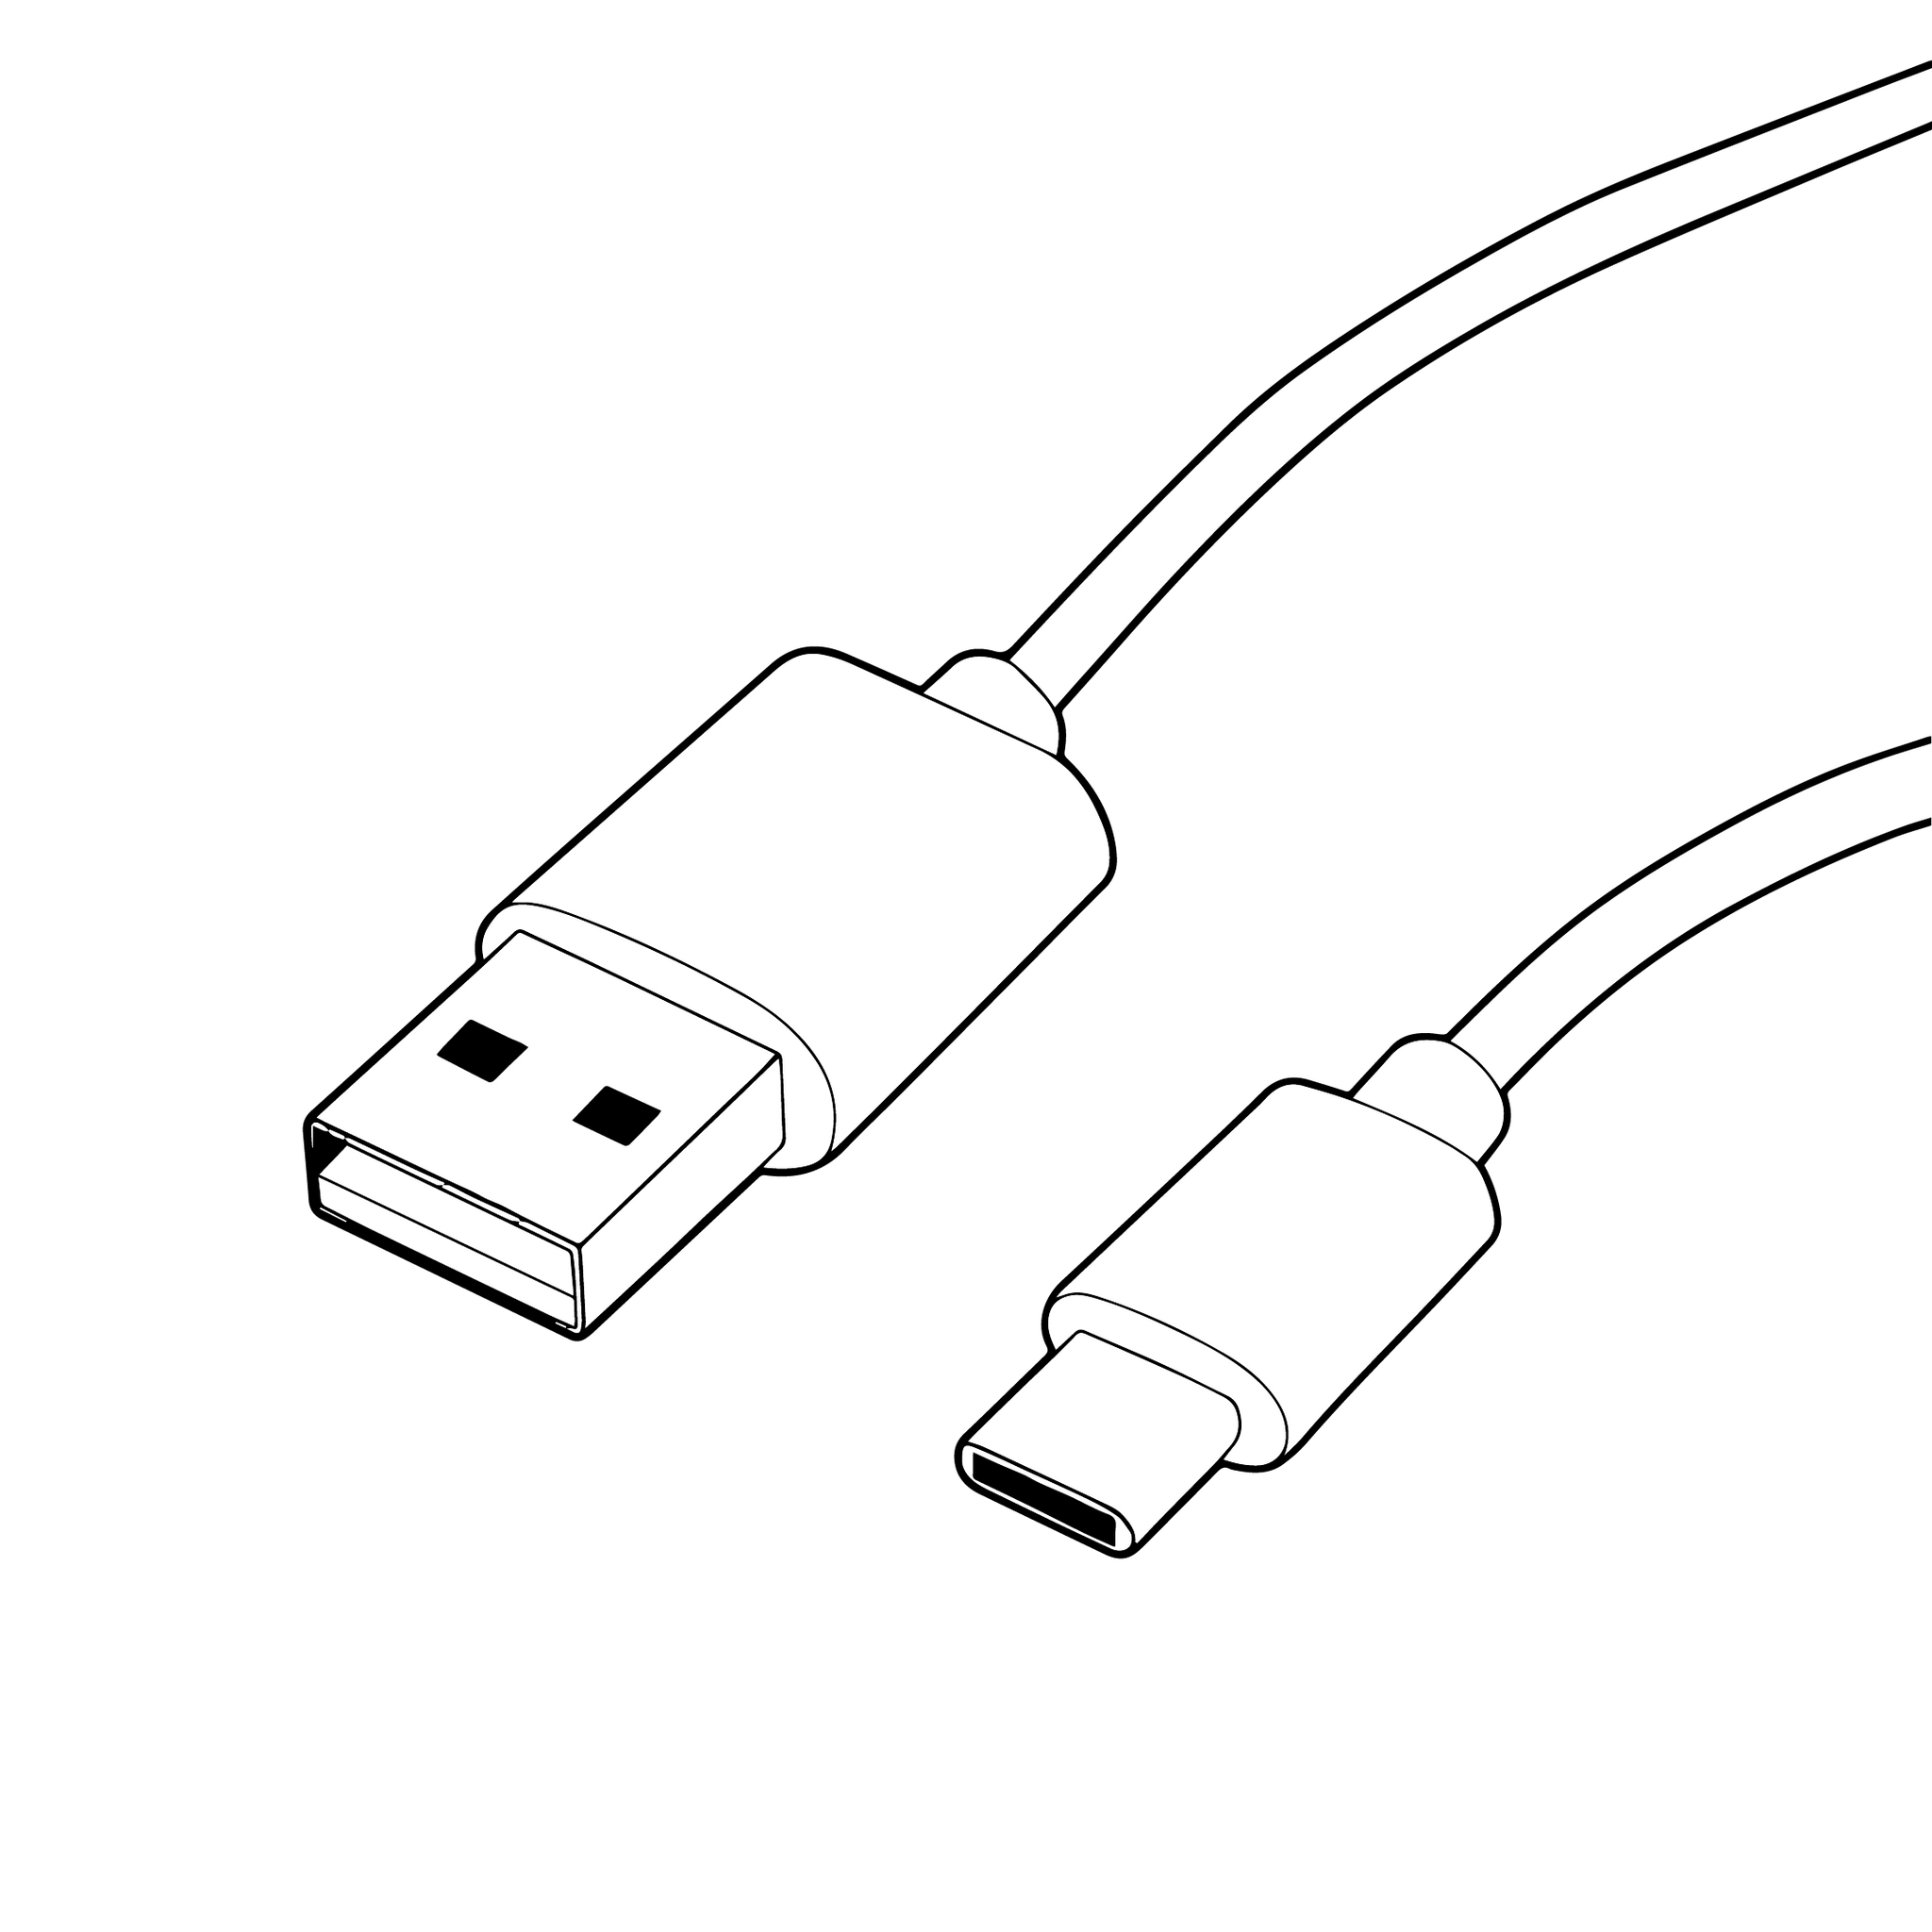 USB and USB-C here are the differences